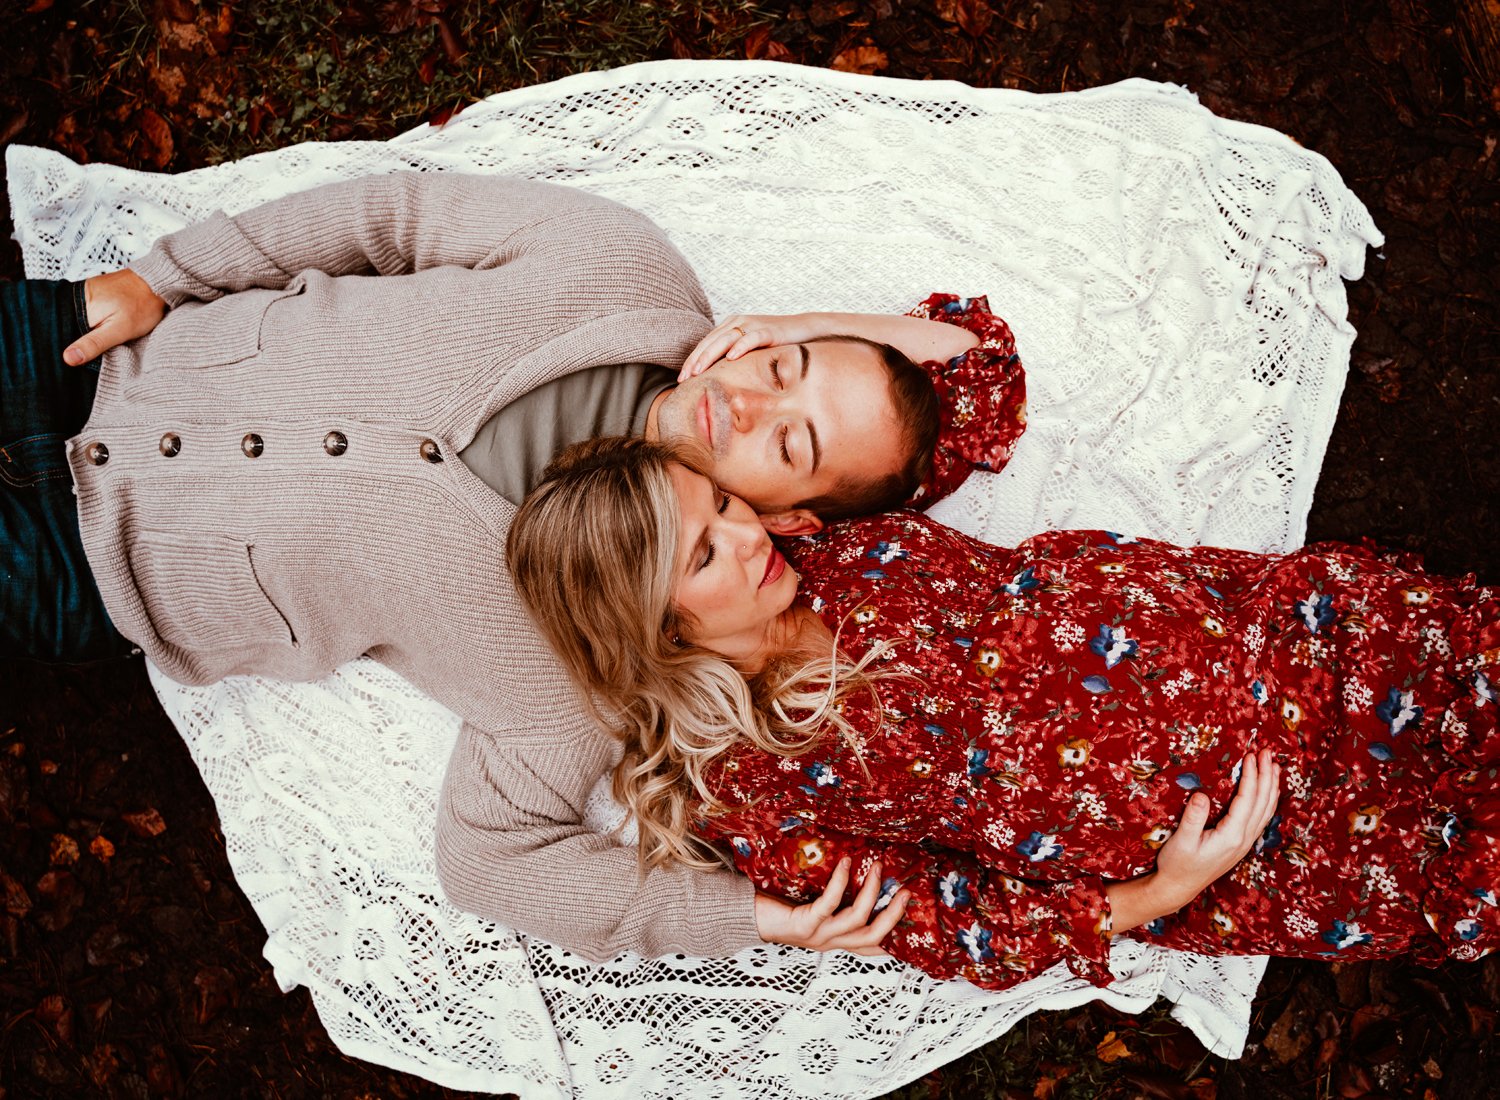 moody-maternity-couple-session-in-fall-season-in-wooded-forest-in-germany-by-motherhood-photographer-sarah-havens-ramtein (9).jpg